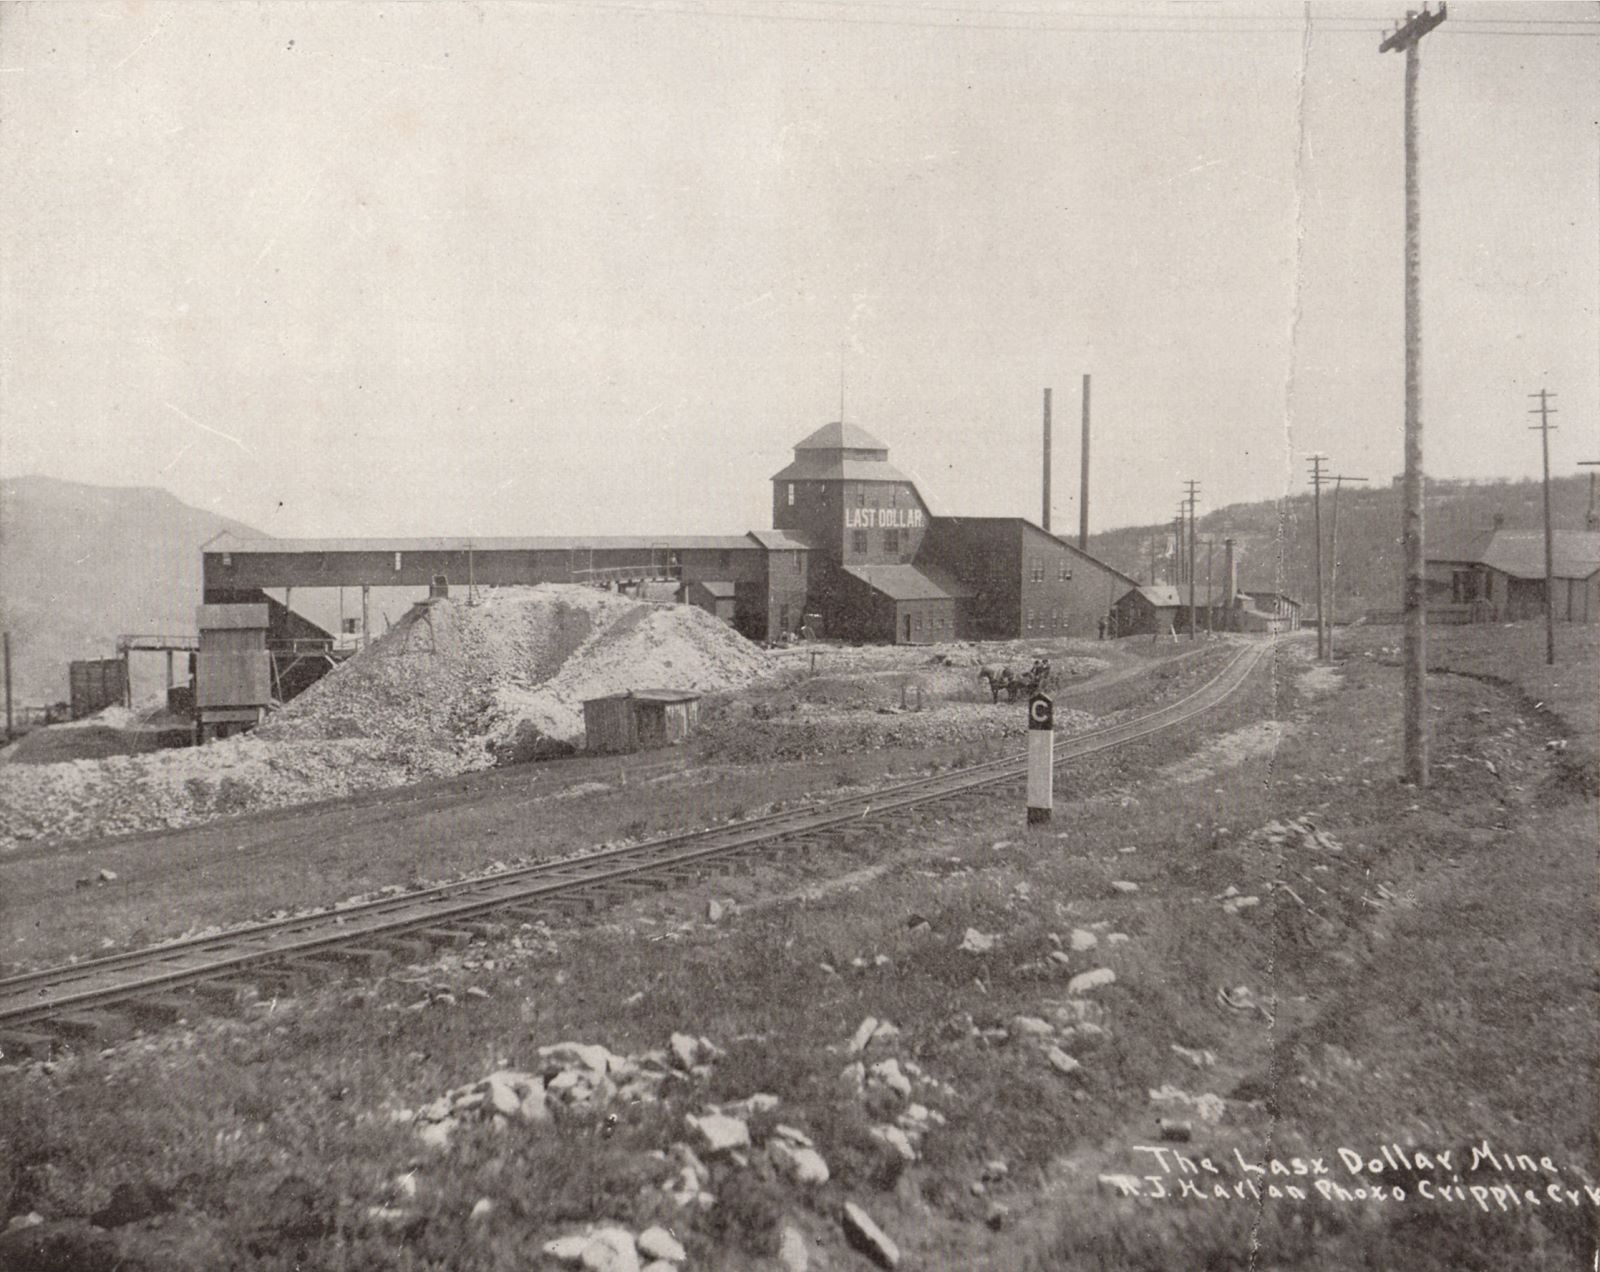 This view of the Last Dollar Mine is photographed same day and time as a more common seen view from nearly same location, where the photographer Harlan as moved closer to the Golden Circle trackage seen near lower left corner, to avoid that telegraph pole in the foreground near right-hand side.
In both views, there is a man dumping an ore-car about 1/4 in from left-hand side on this view, in front of the covered gangway from mine to the ore-house seen near left-hand side. The ore-house was connected to another Golden Circle spur, which also went on to other mines around the town of Independence, while the track in the foreground is the mainline going towards Victor mine high up on Bull Cliffs/Hills.